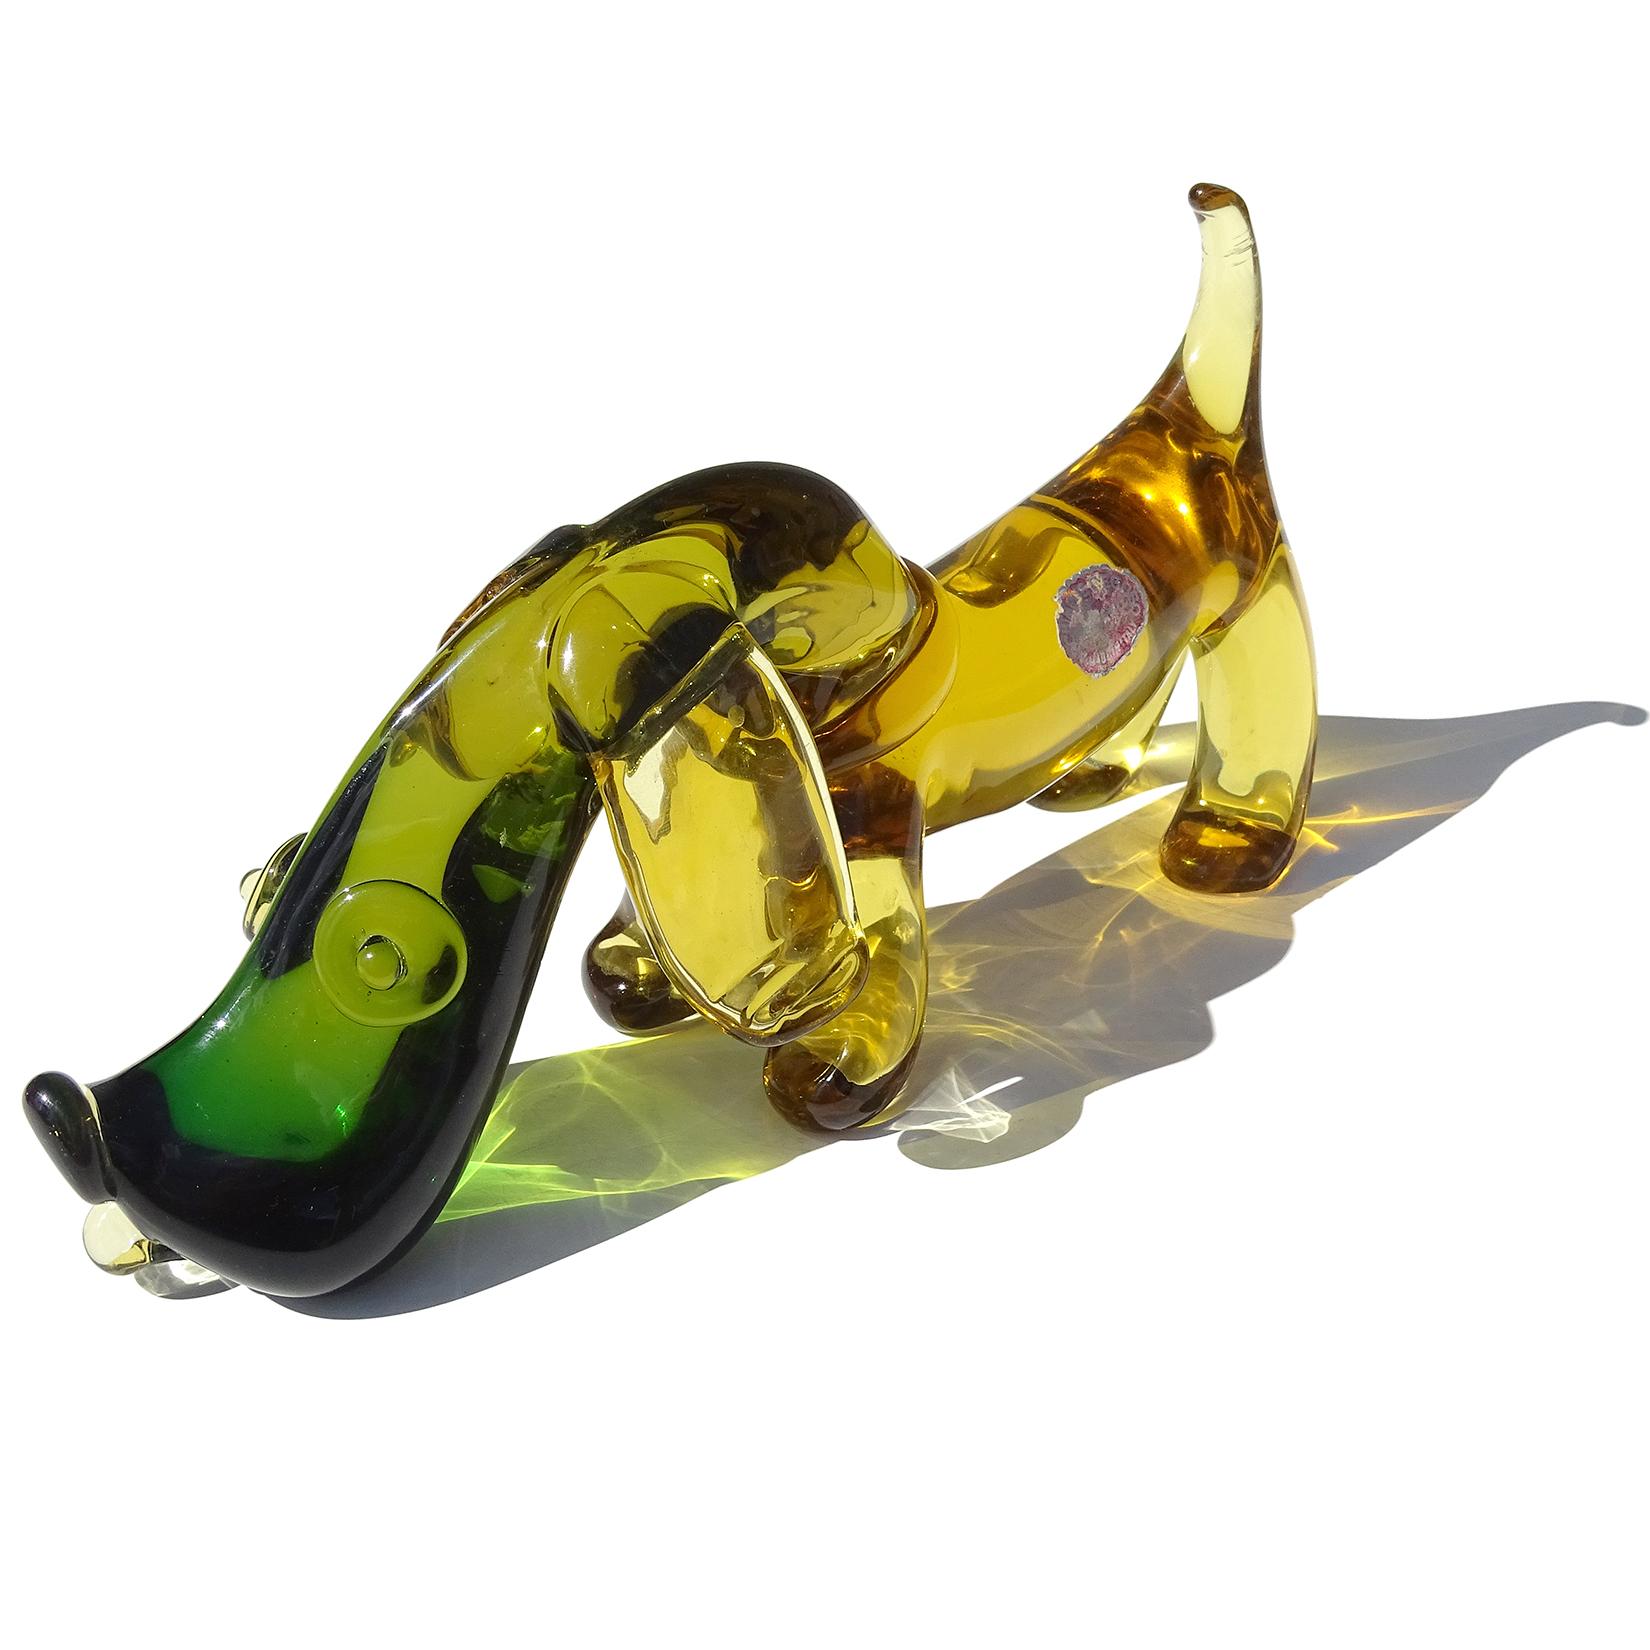 Beautiful and cute Murano hand blown Sommerso honey yellow orange and green Italian art glass Dachshund puppy dog sculpture. Documented to designer Archimede Seguso, with worn 